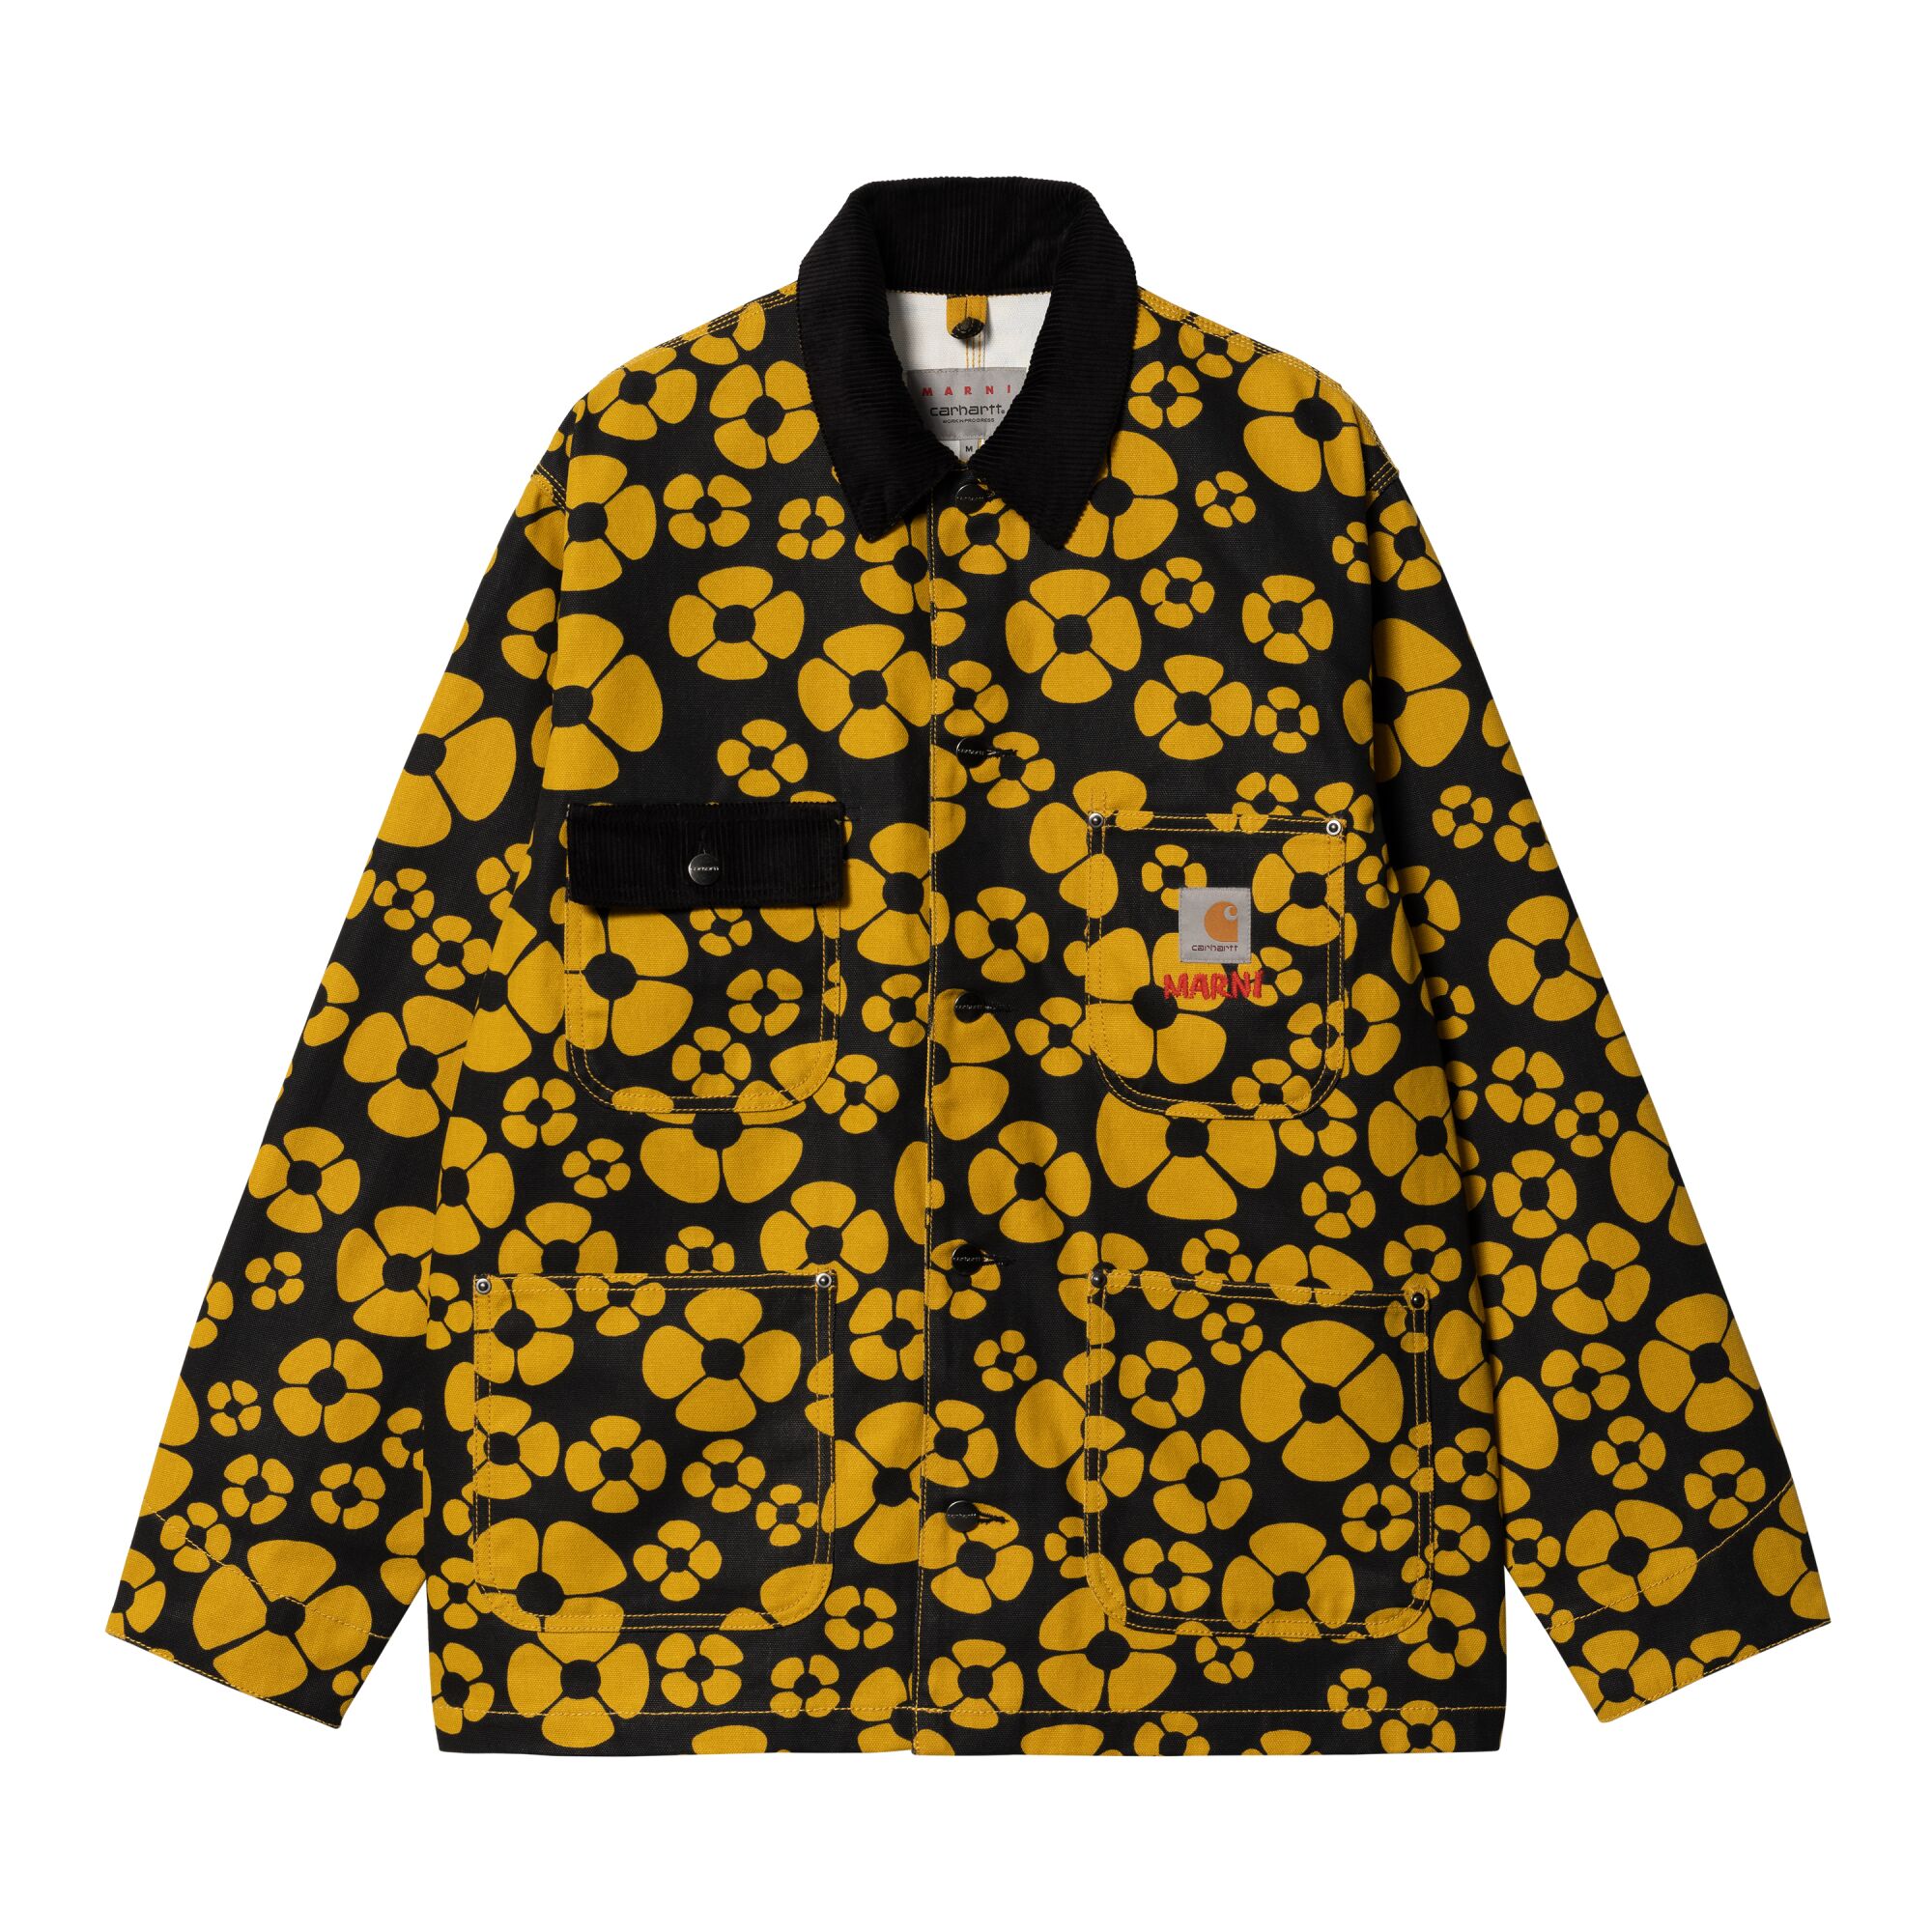 A jacket with a pattern of yellow flowers on a black background